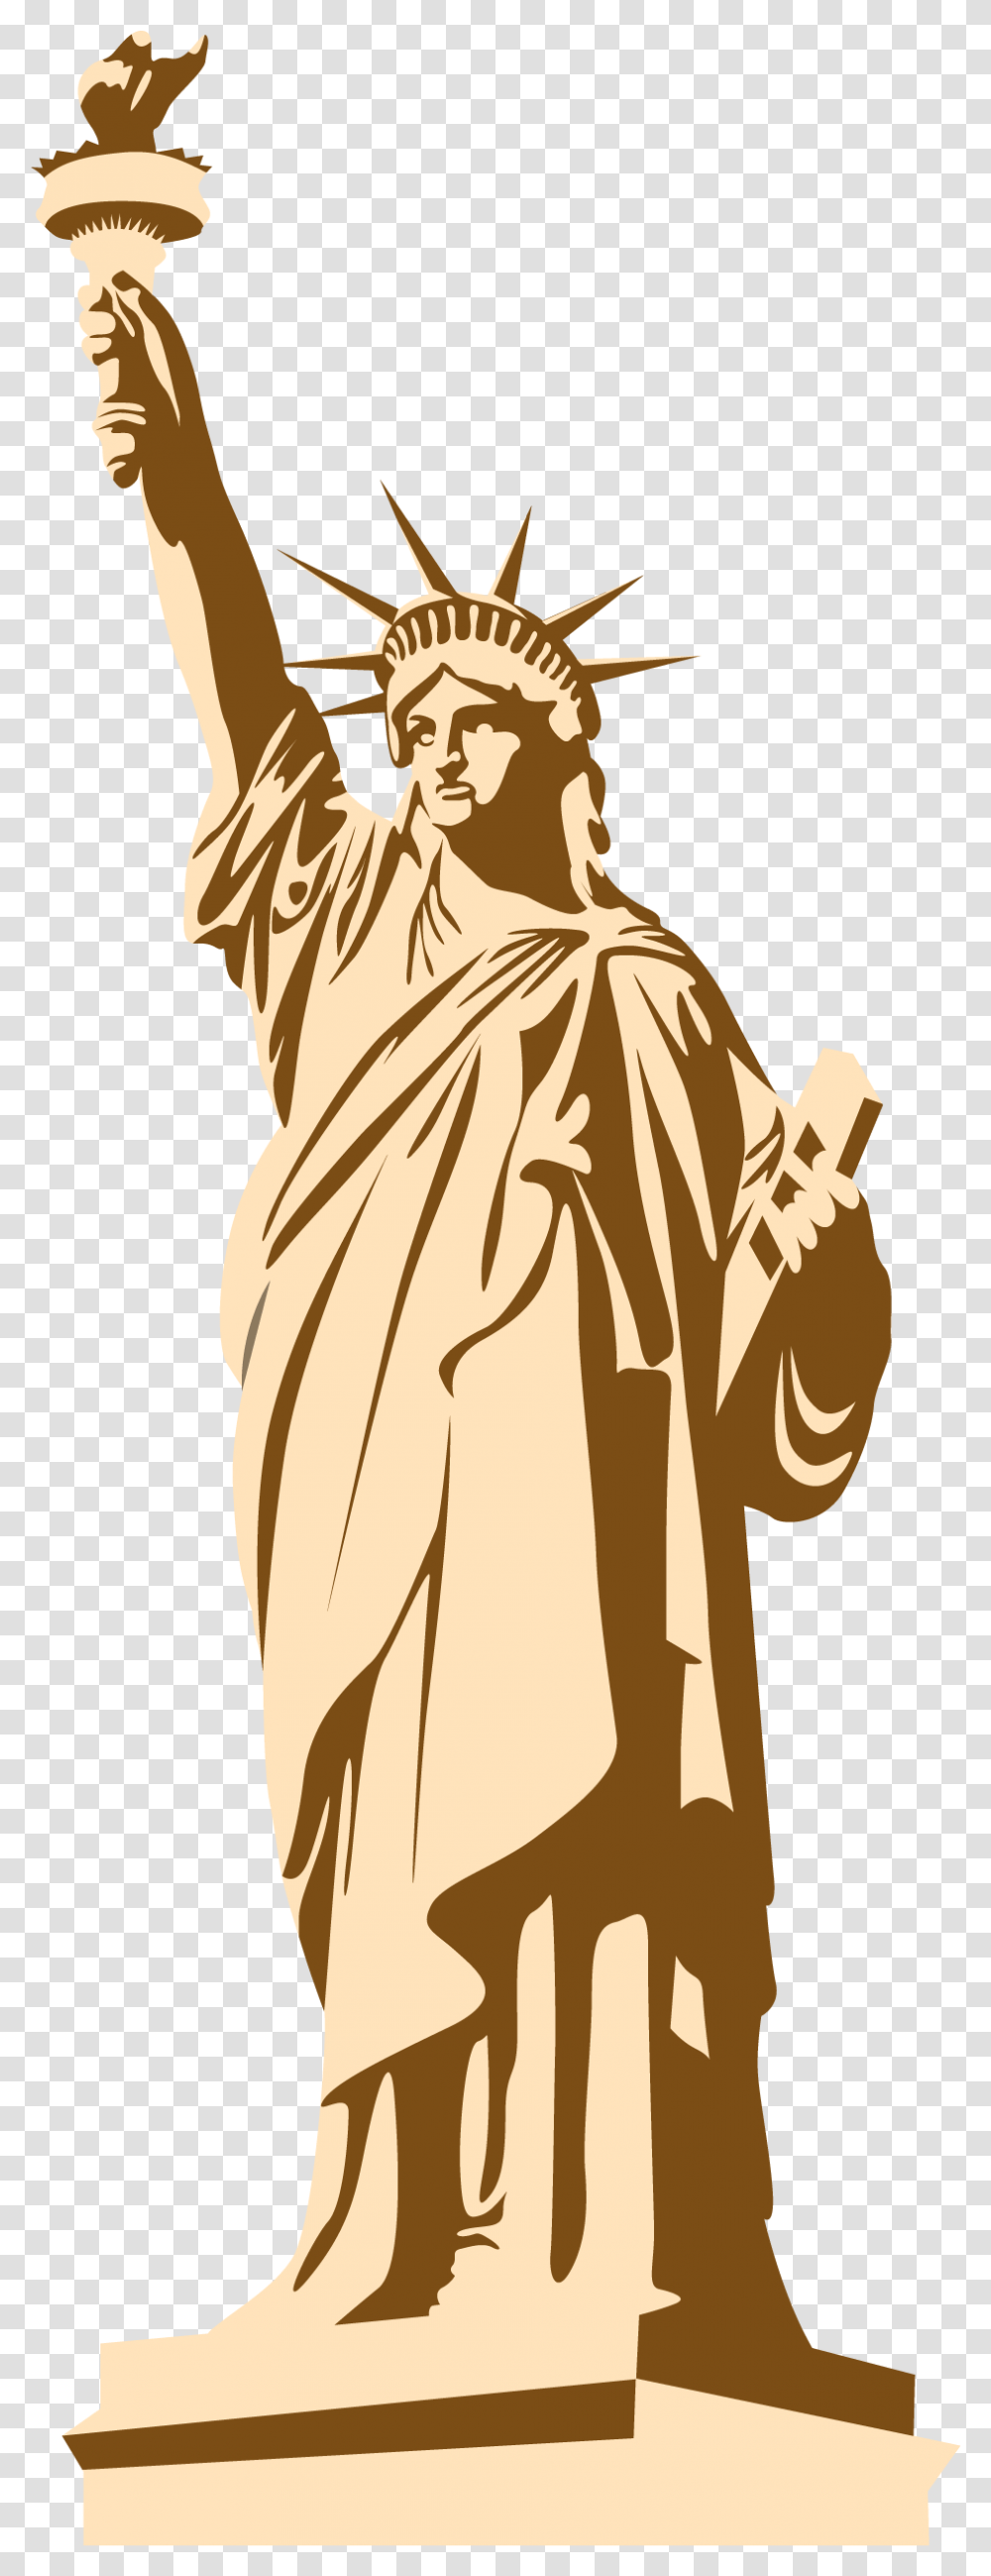 Statue Of Liberty Free Statue Of Liberty Crown, Clothing, Person, Art, Leisure Activities Transparent Png